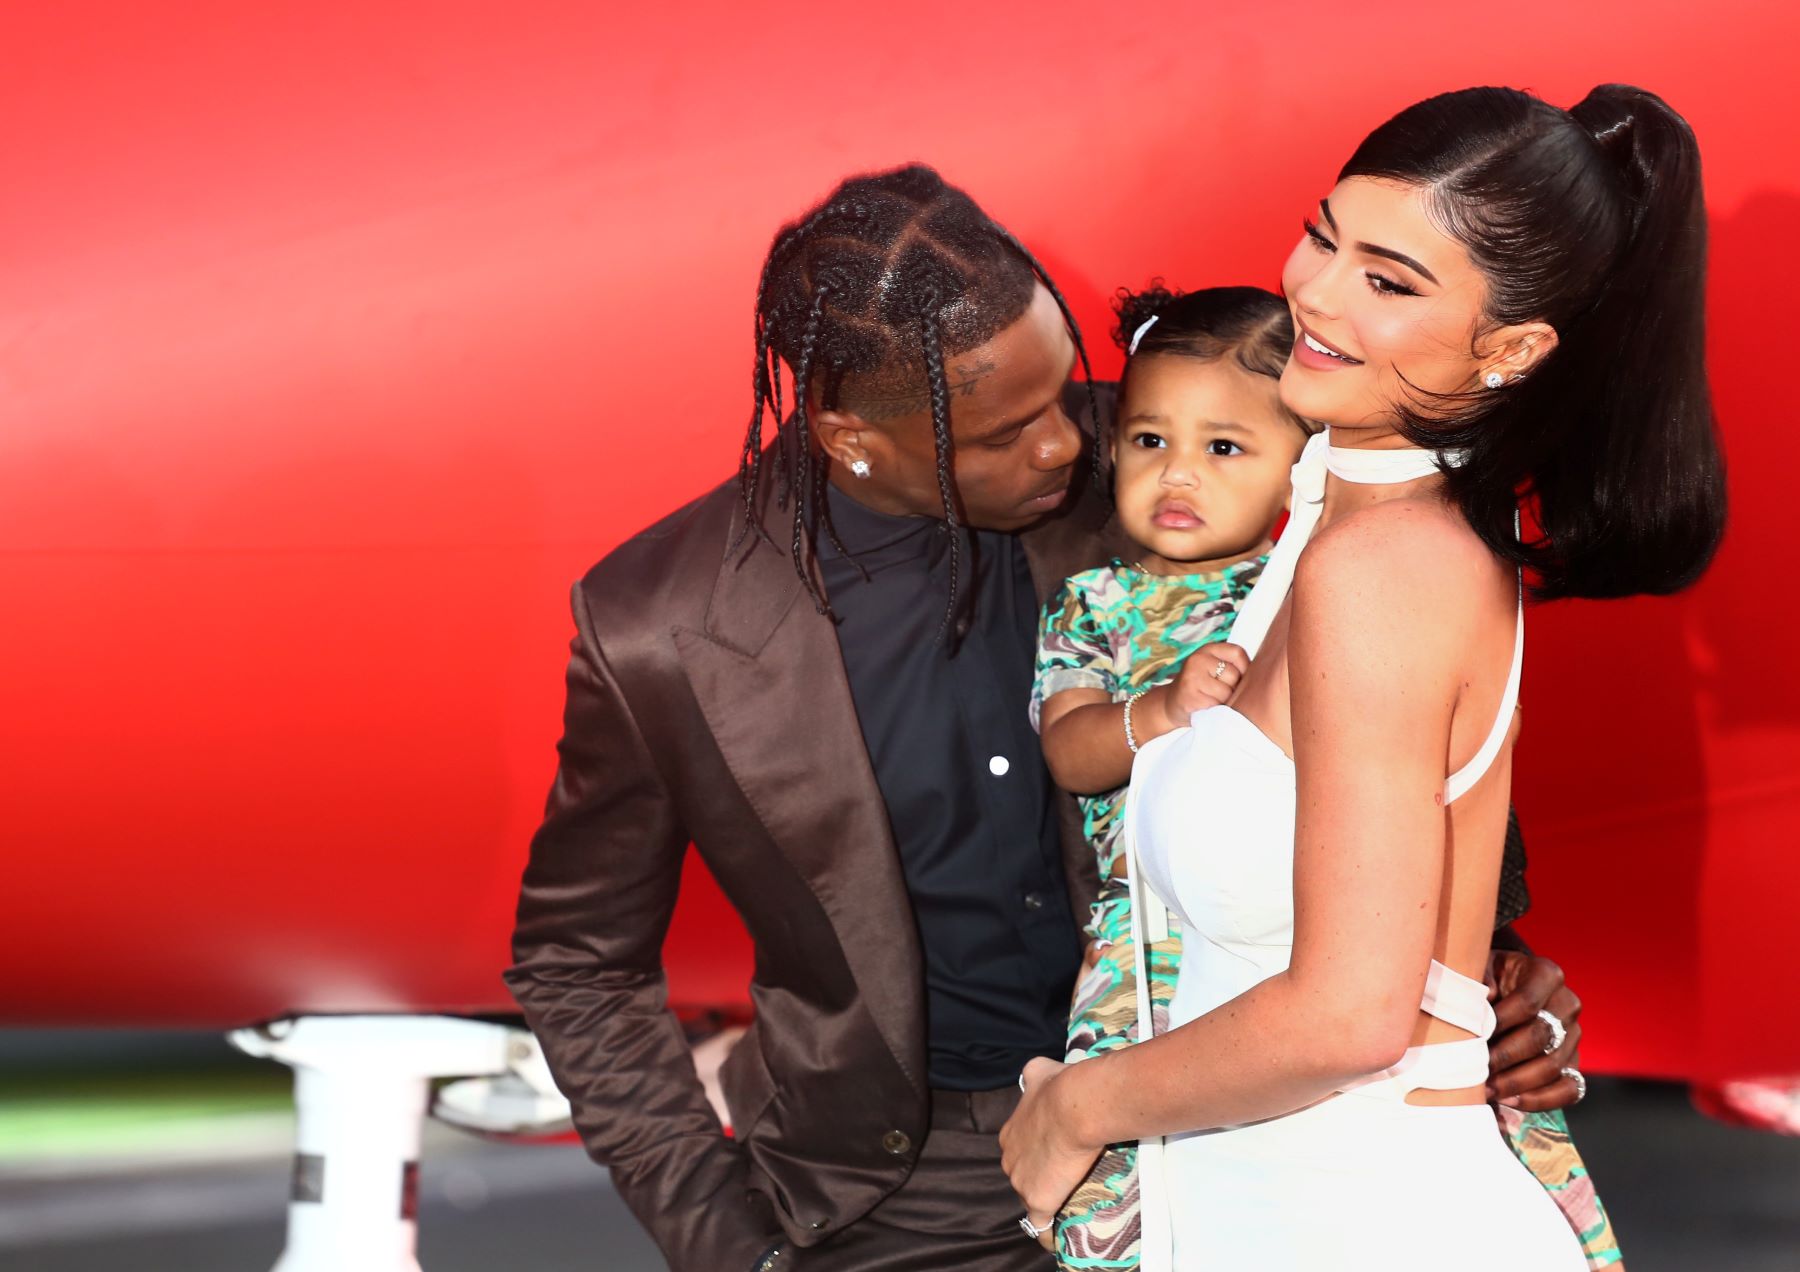 Travis Scott, Kyliner Jenner, and their daughter Stormi at the 'Look Mom I Can Fly' Los Angeles premiere